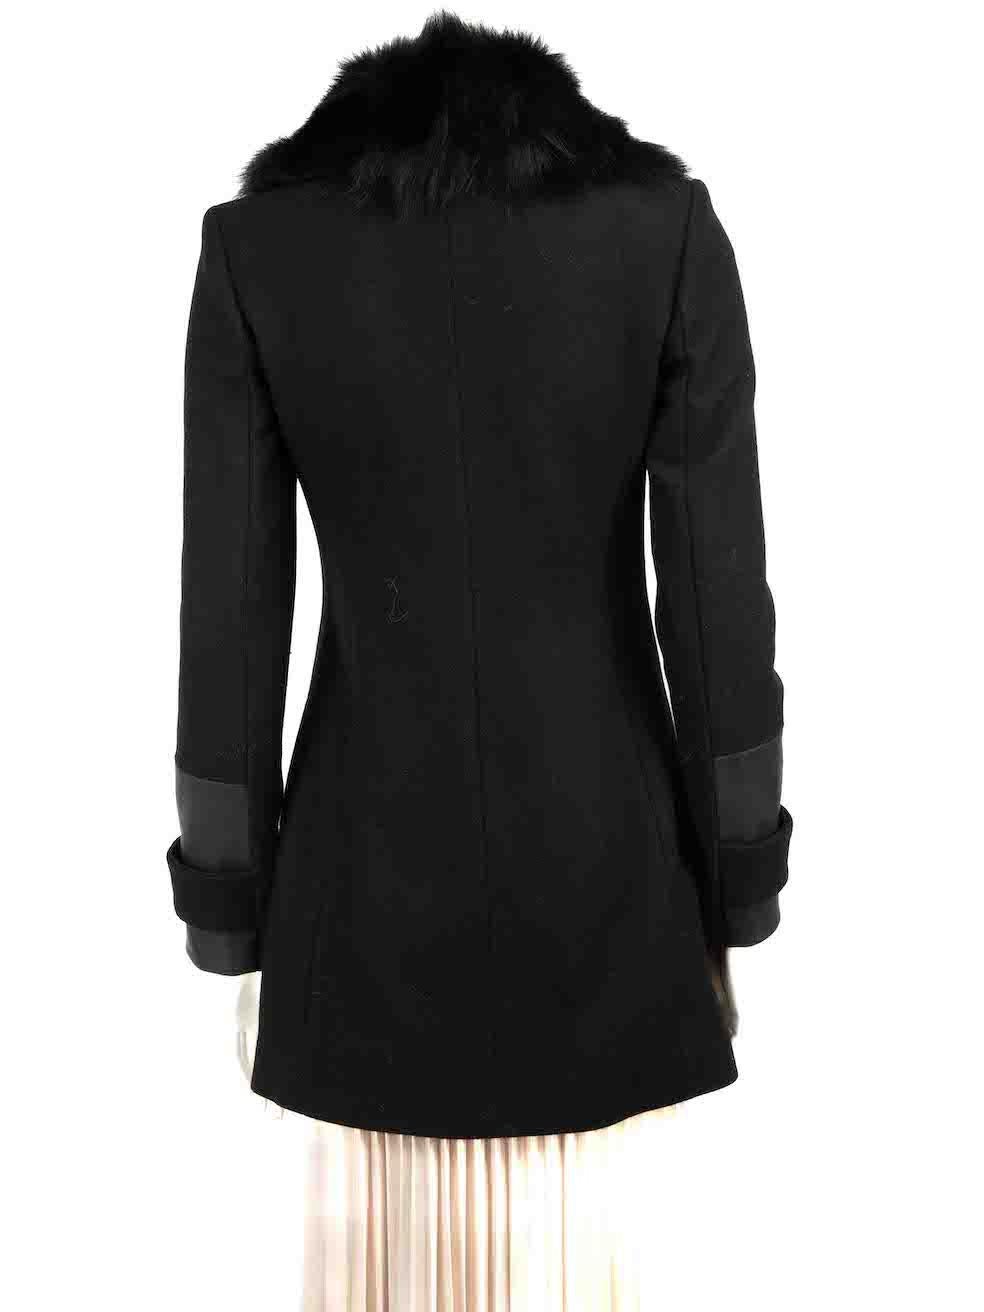 Pinko Black Wool Asymmetric Fur Collared Coat Size S In Good Condition For Sale In London, GB